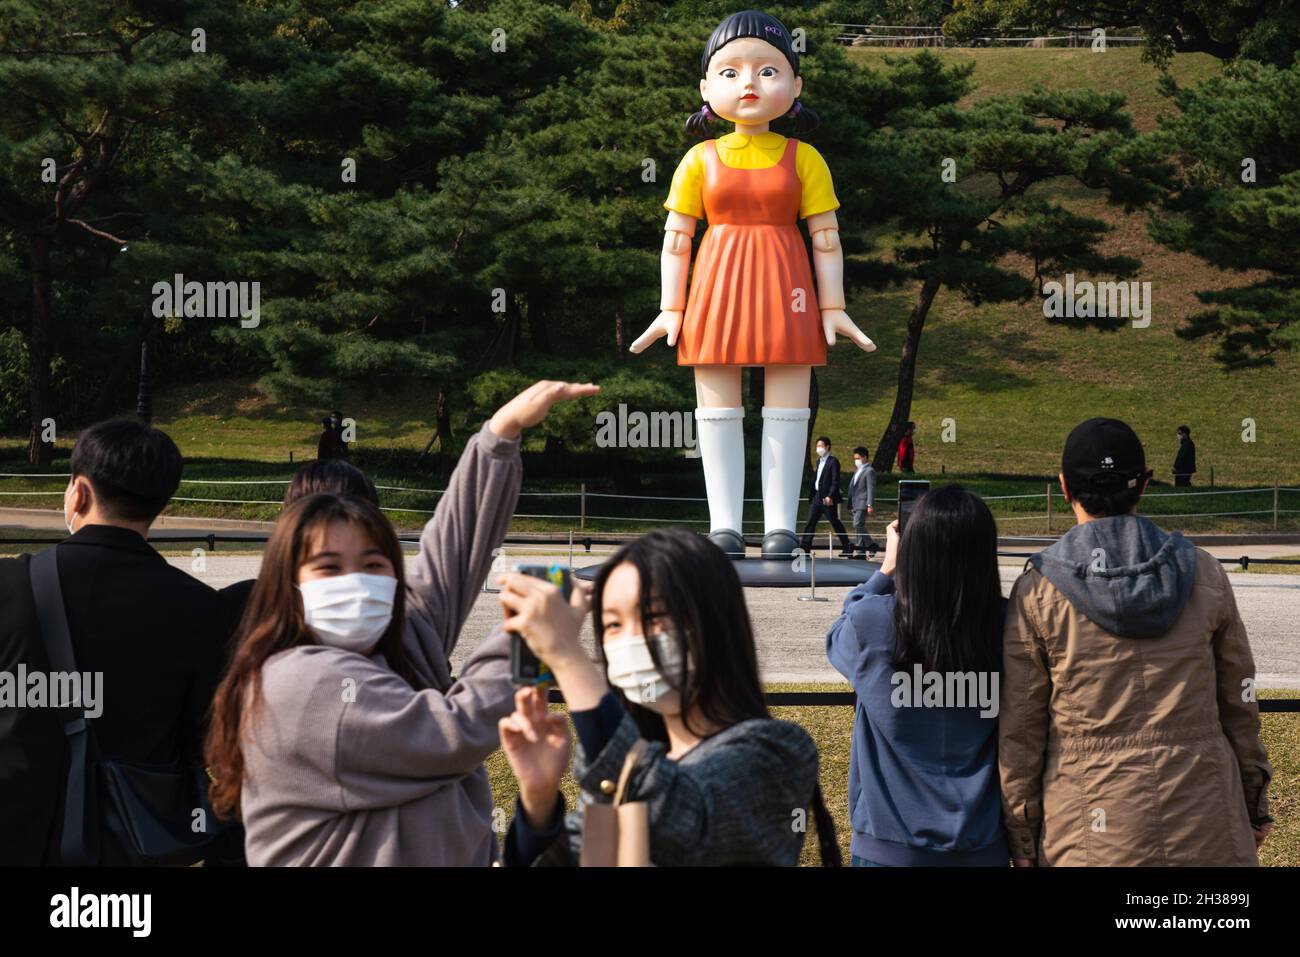 Seoul, South Korea. 26th Oct, 2021. People take photos of the giant doll from Netflix original series 'Squid Game' at the Olympic Park in Seoul. The giant doll from Netflix original series 'Squid Game' is displayed at Olympic Park in Seoul, South Korea from October 25 to January 23 next year. (Photo by Simon Shin/SOPA Images/Sipa USA) Credit: Sipa USA/Alamy Live News Stock Photo